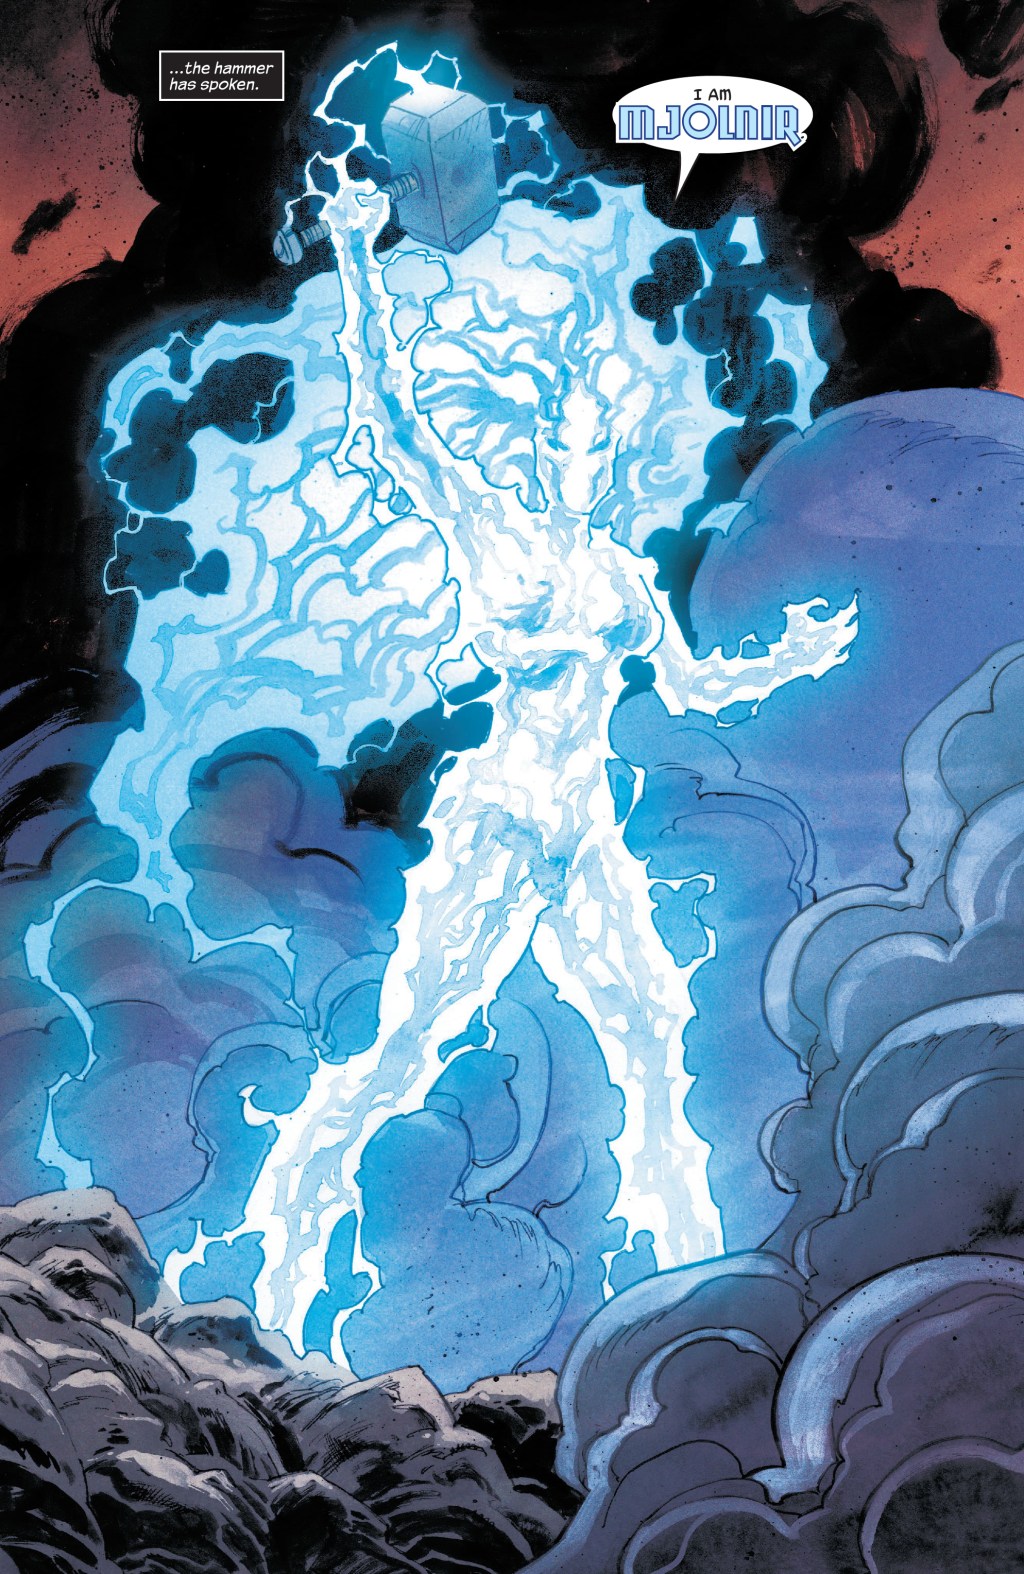 Mjolnir reveals herself as the God of Hammers in Thor Vol. 6 #20 "God of Hammers - Part Two of Five" (2022), Marvel Comics. Words by Donny Cates, art by Nic Klein, Matt Wilson, and Joe Sabino.